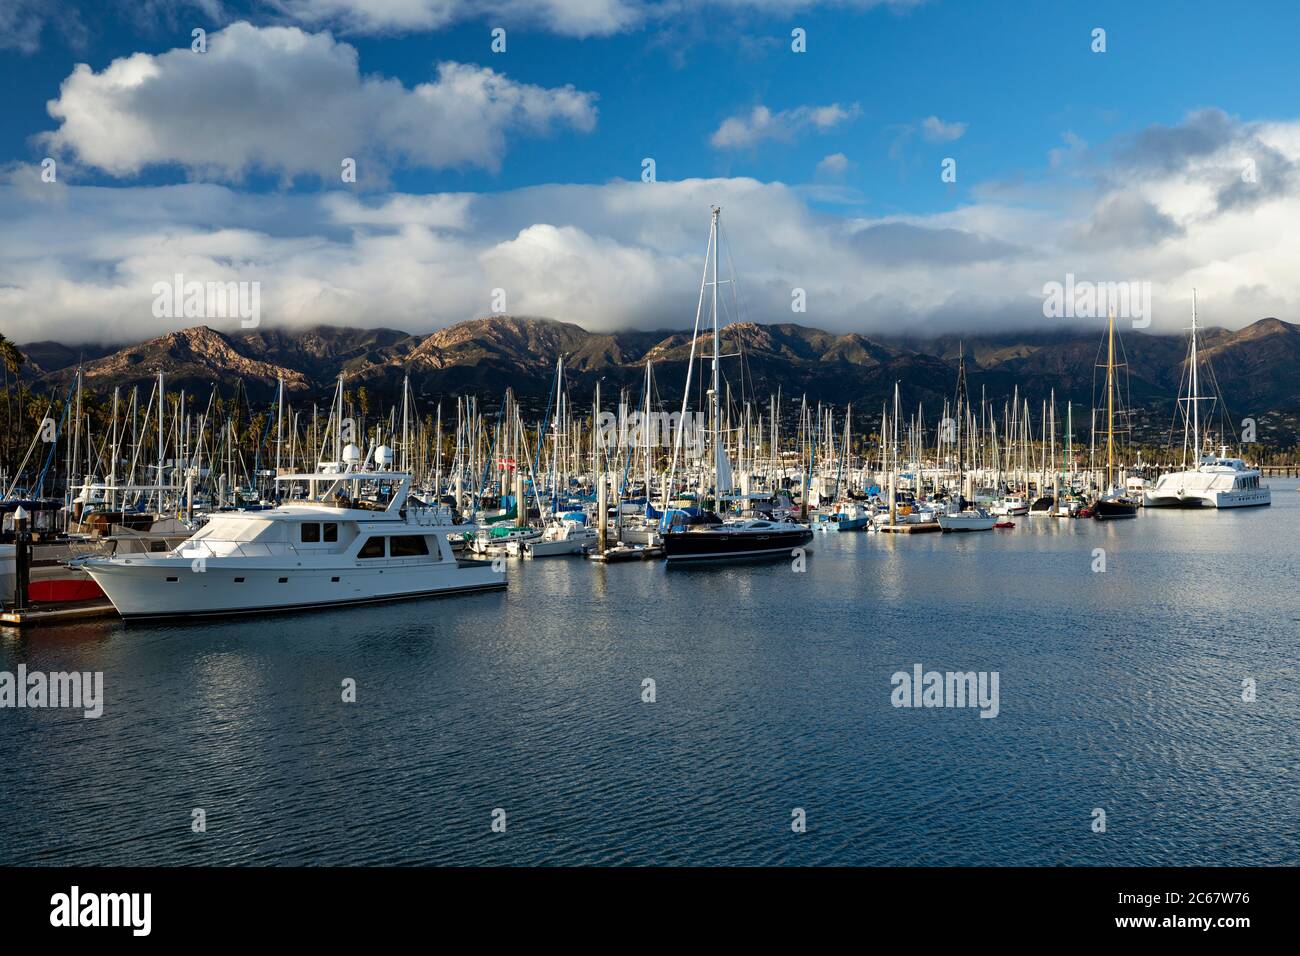 Large number of yachts moored in harbor with hills in background, Santa Barbara, California, USA Stock Photo